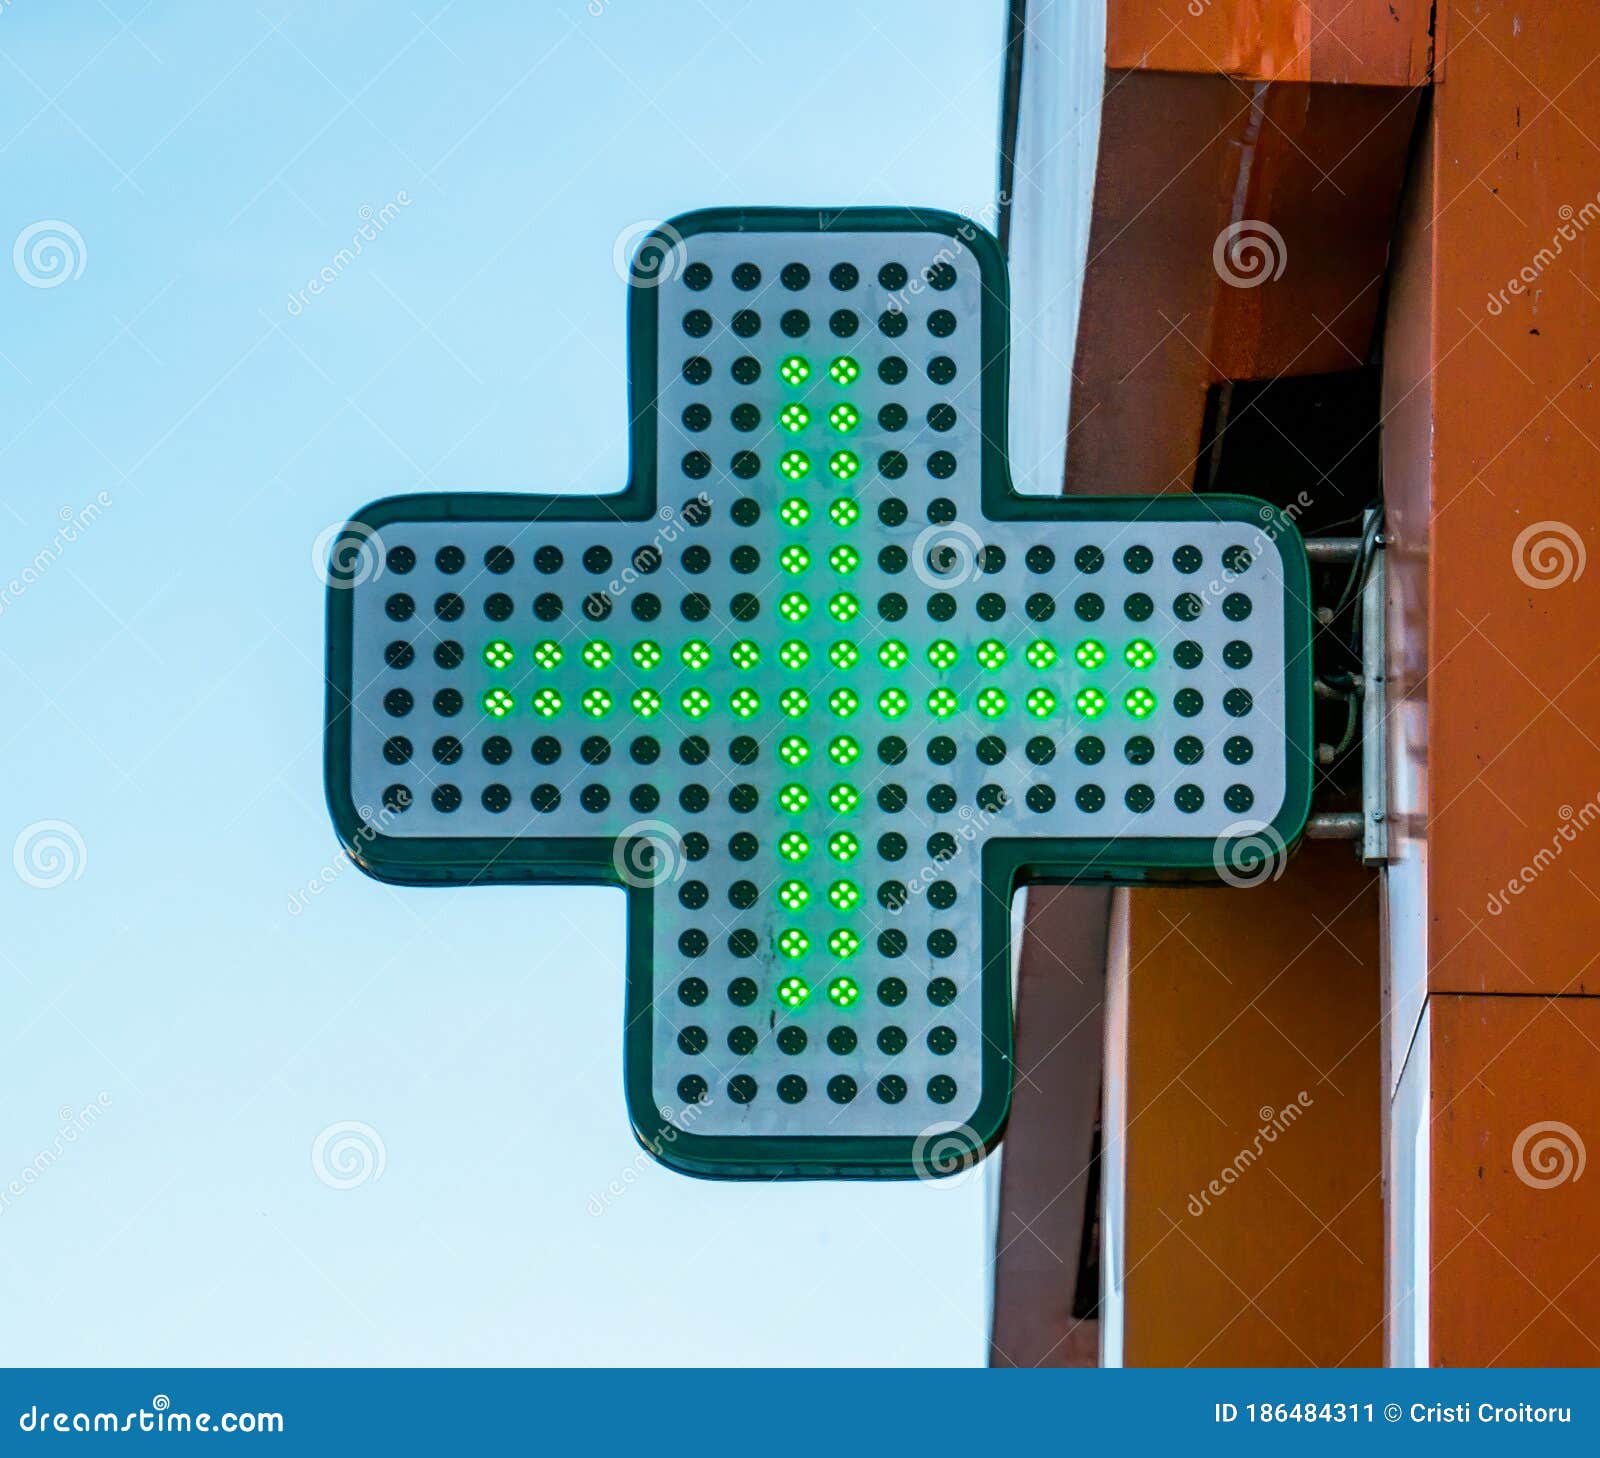 Pharmacy Green Cross Sign in Bucharest Stock Image - Image of hanging ...